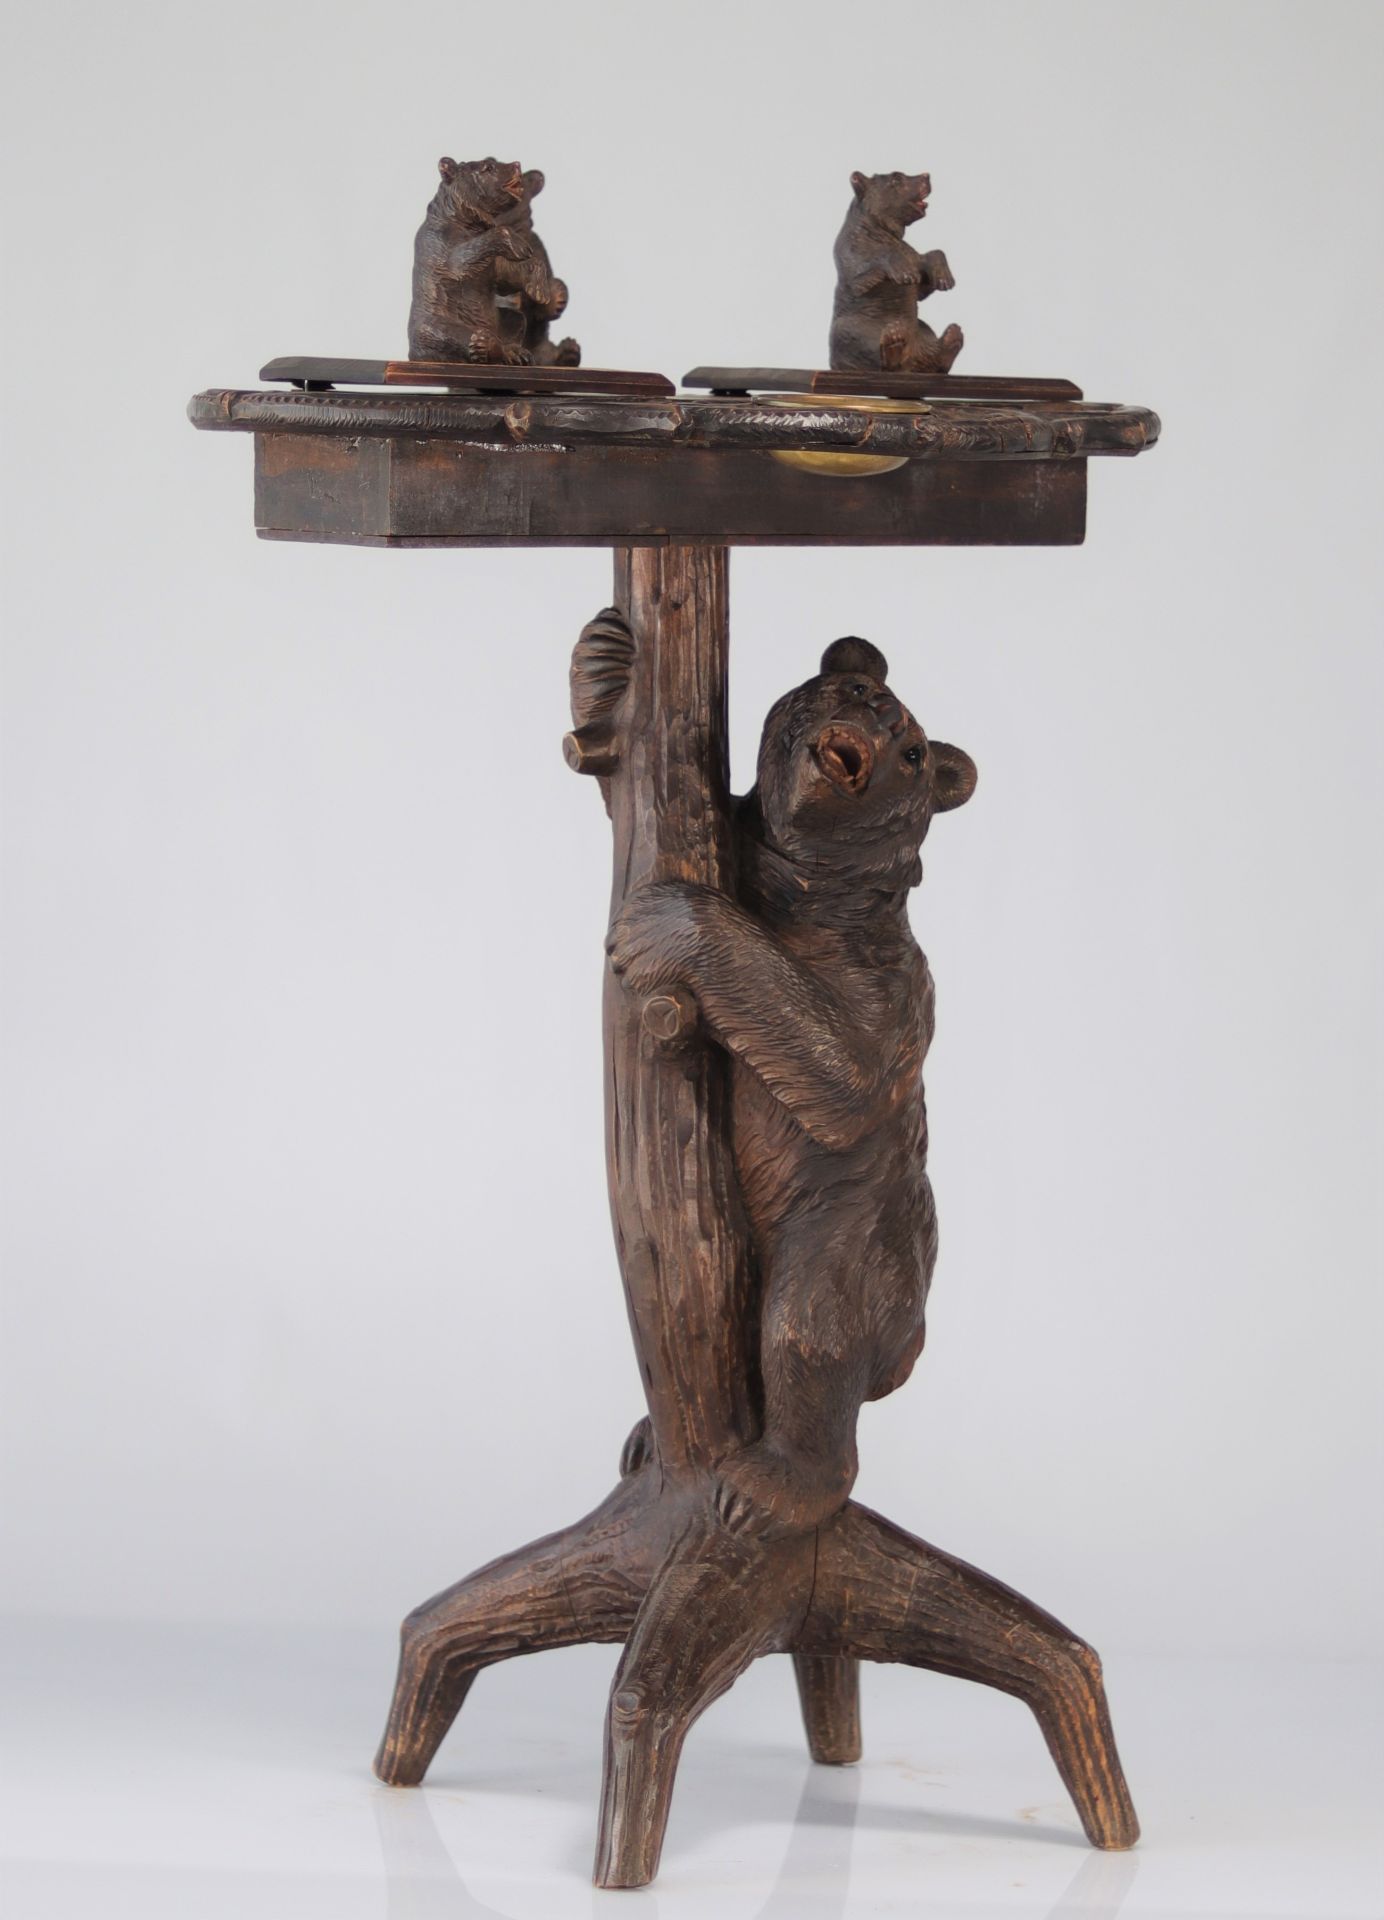 Smoking table in carved wood decorated with bears 19th